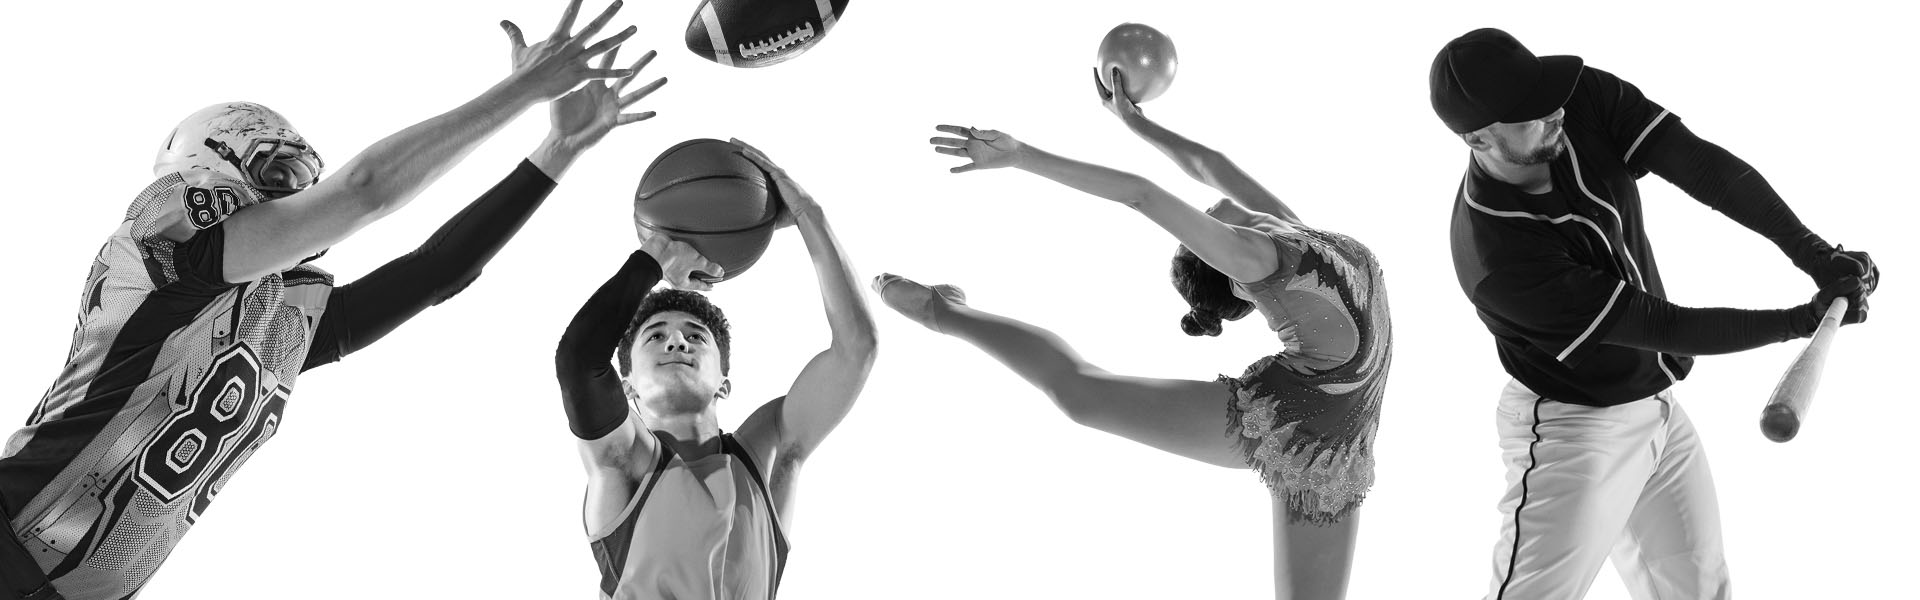 athletes in motion, including a basketball player launching a ball into the air and a gymnast bending gracefully